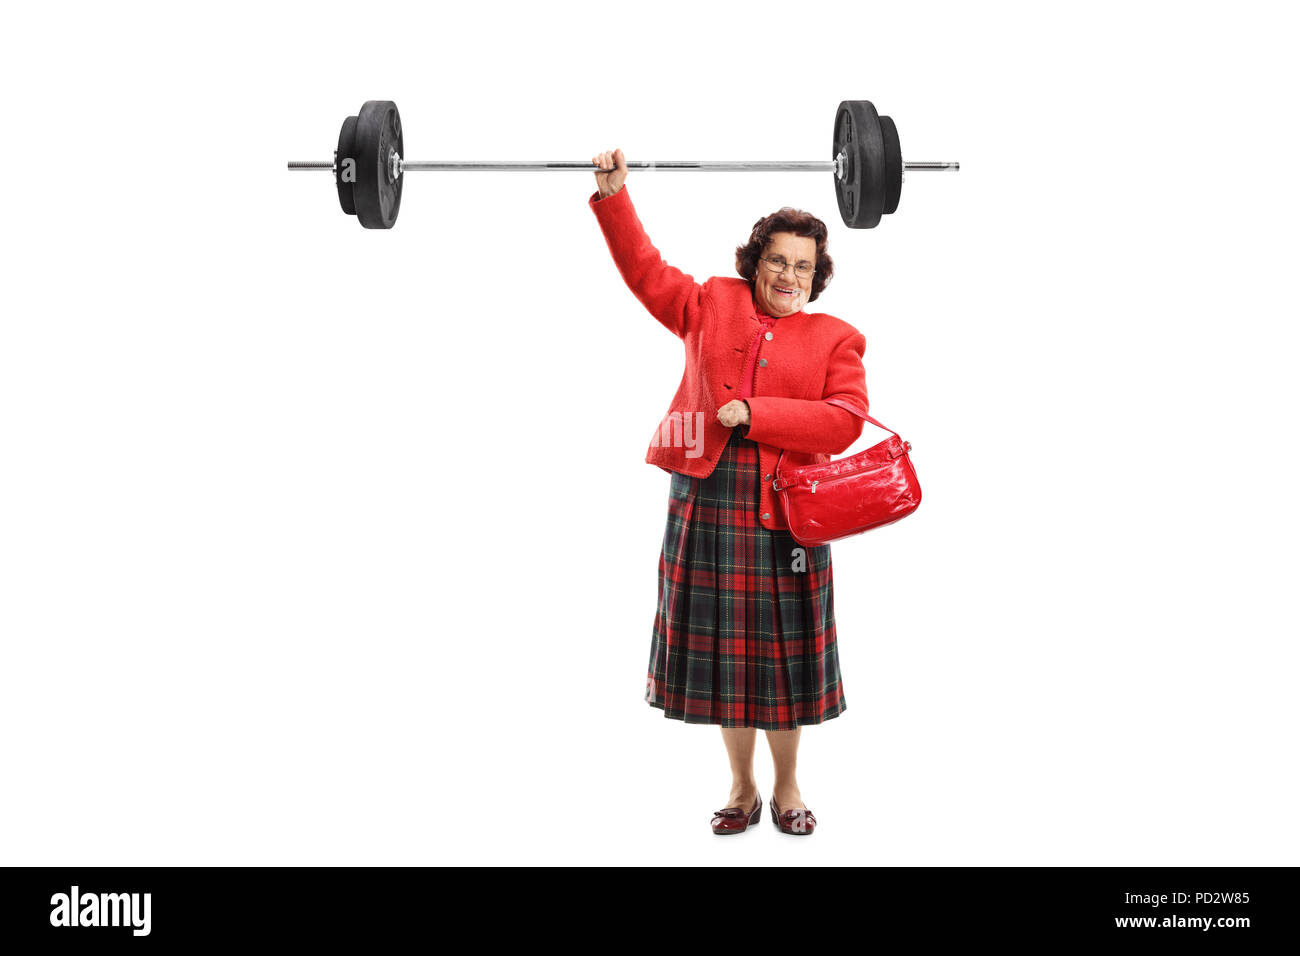 Full length portrait of a senior lady lifting a barbell with one hand isolated on white background Stock Photo